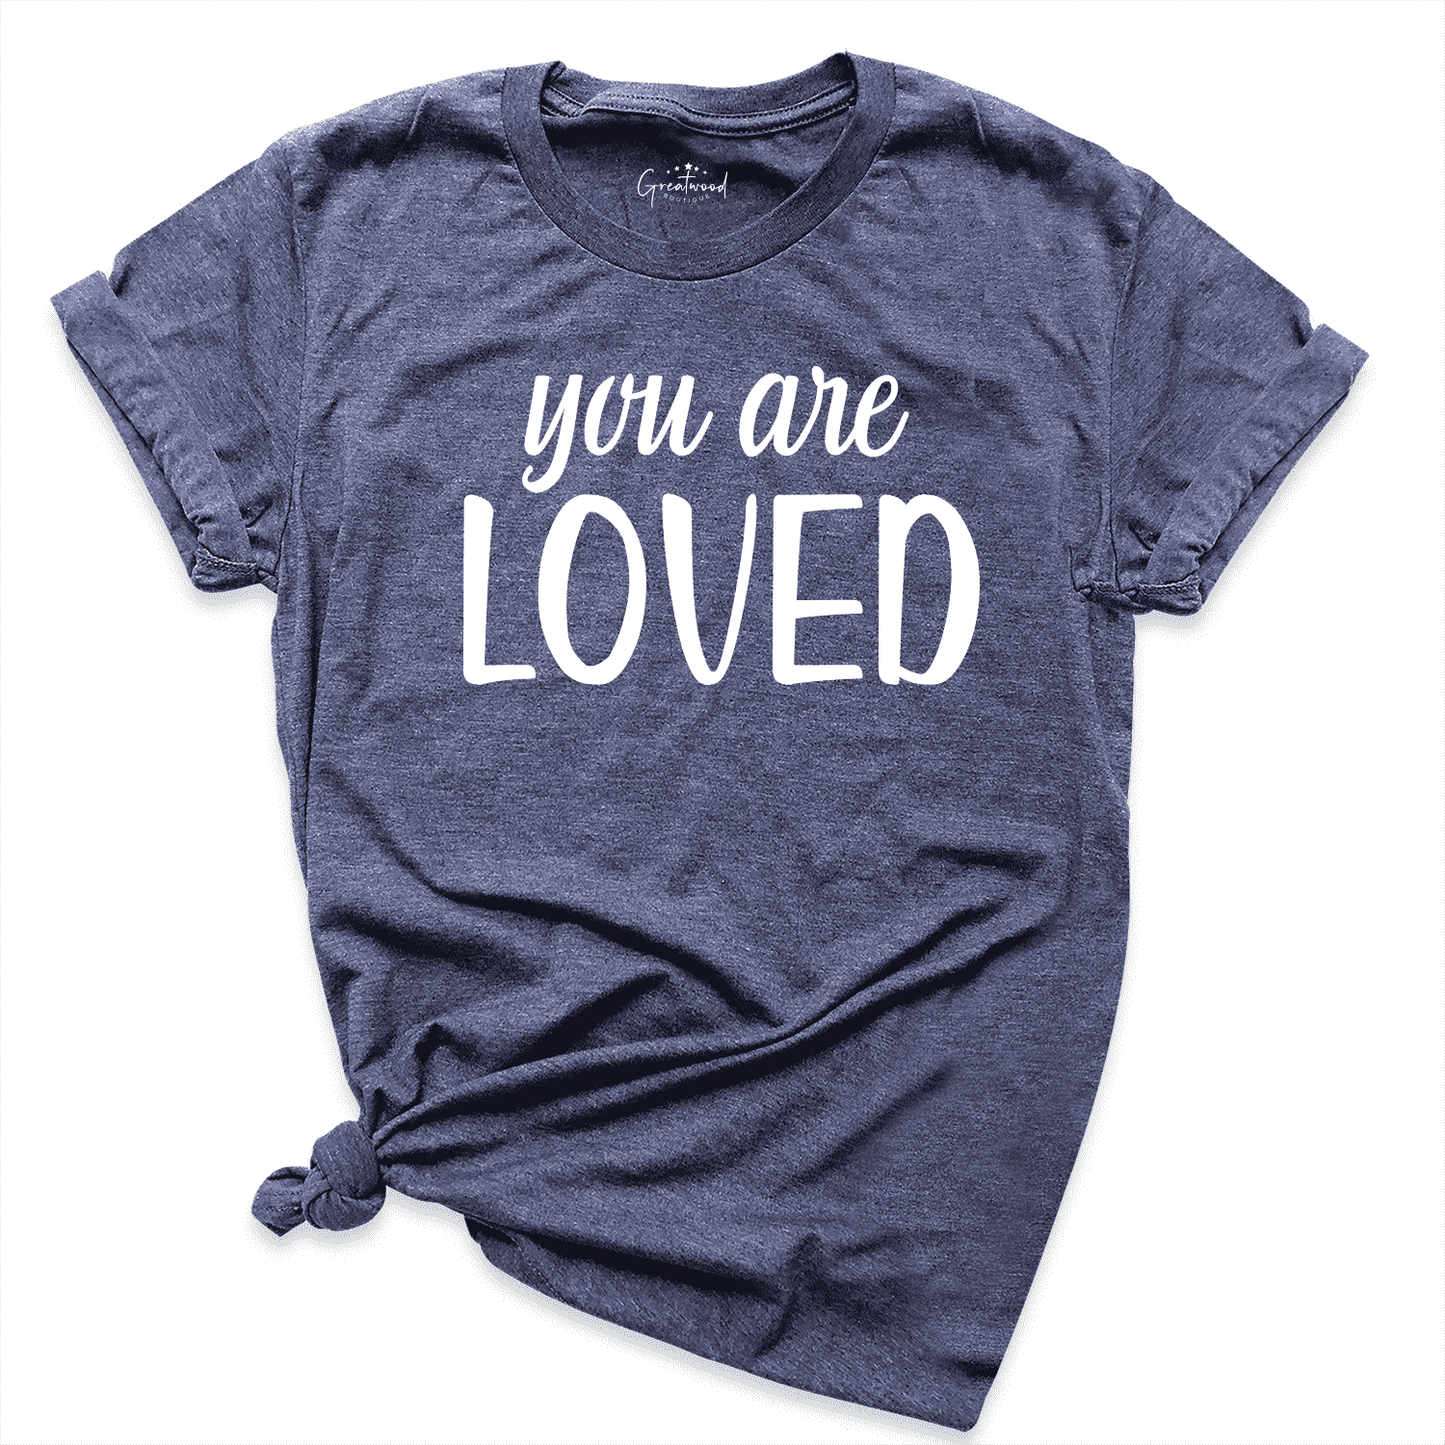 You Are Loved Shirt Navy - Greatwood Boutique